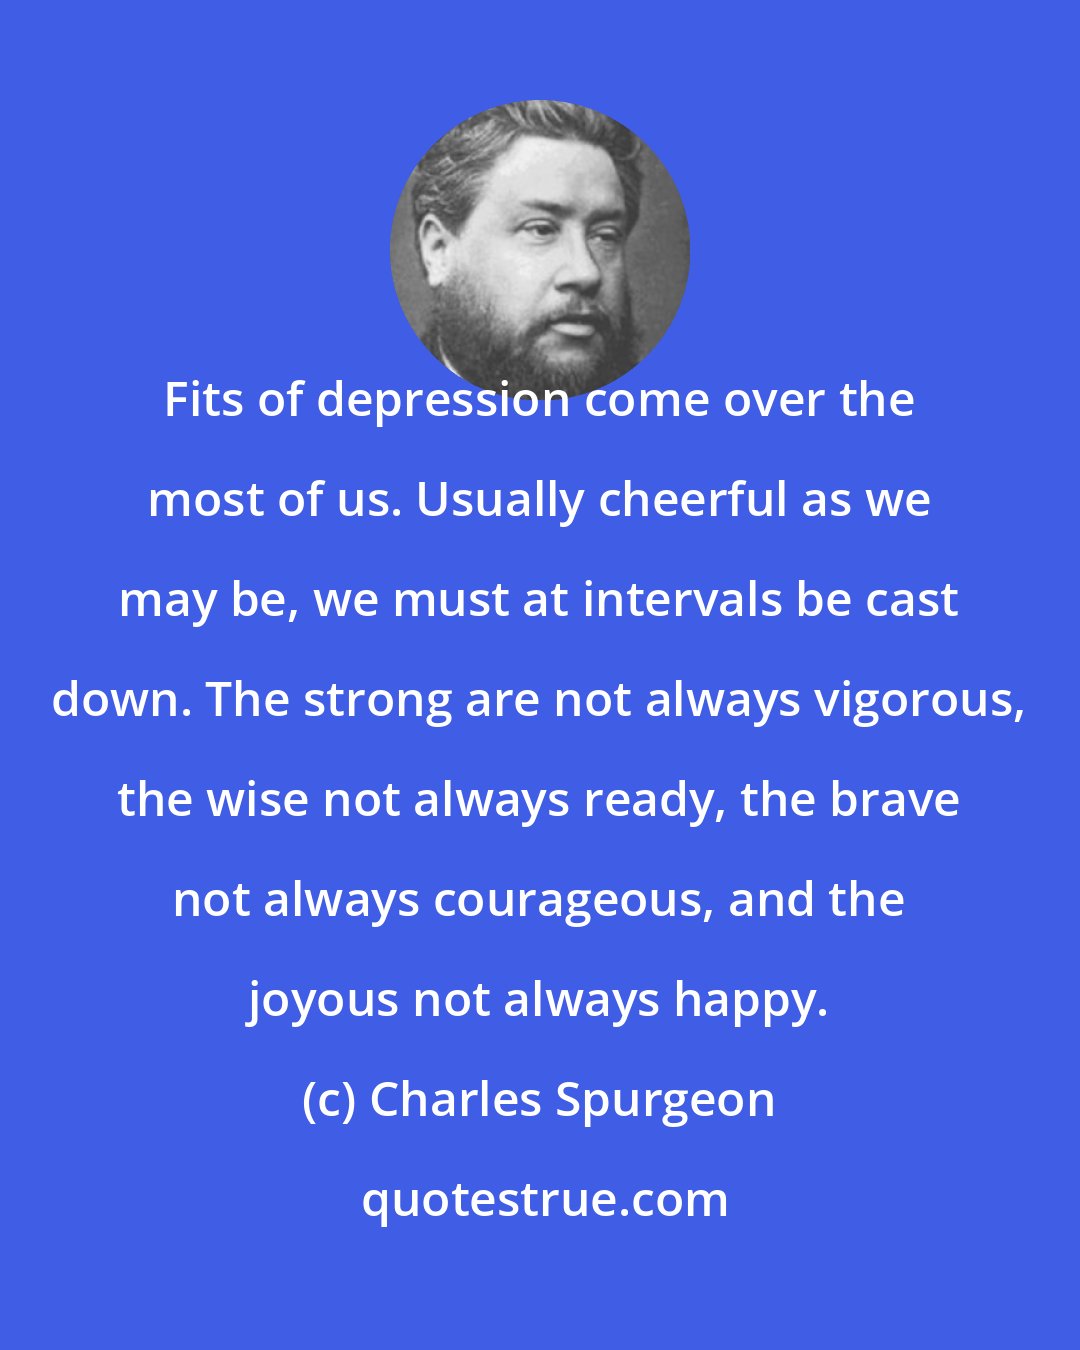 Charles Spurgeon: Fits of depression come over the most of us. Usually cheerful as we may be, we must at intervals be cast down. The strong are not always vigorous, the wise not always ready, the brave not always courageous, and the joyous not always happy.